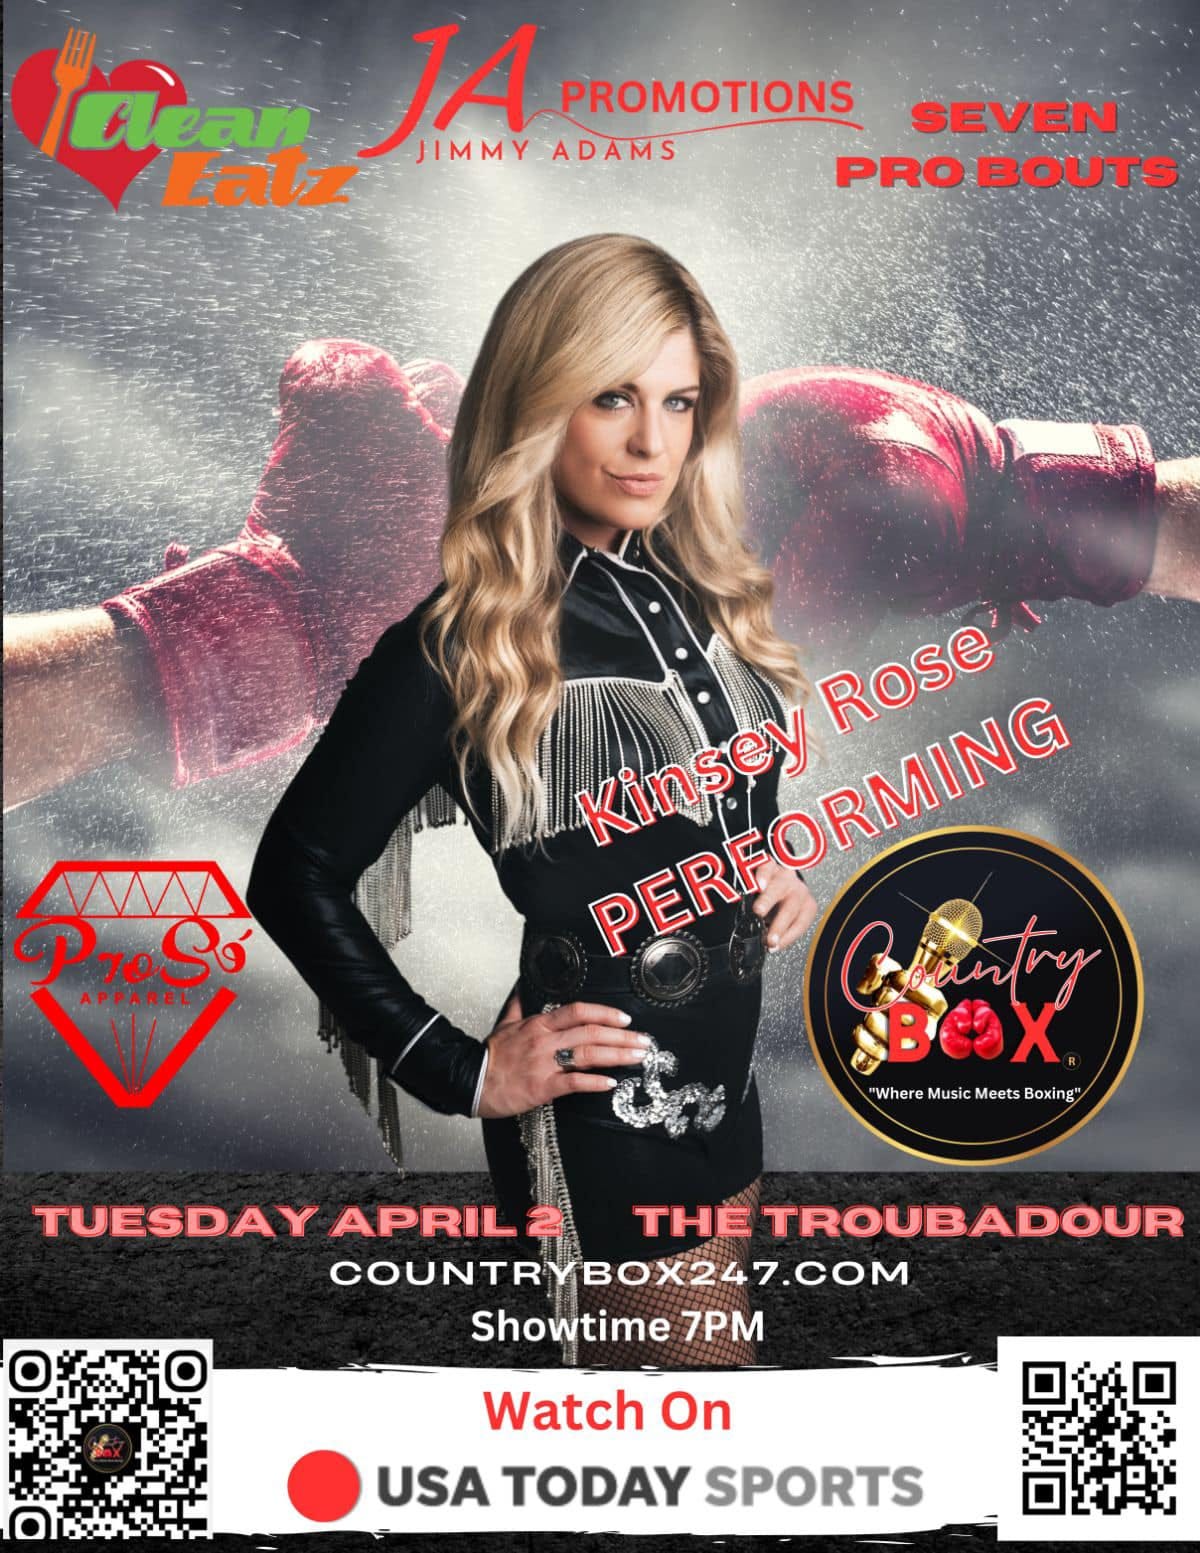 May be an image of 1 person and text that says 'nean JA JIMMY ADAMS PROMOTIONS SEVEN Eatz PRO BOUTS LVA PገoS APPAREL Rose Kinsey PERFORMING Cbantry "Where Music Meets " Boxing" TUESDAY APRIL THE TROUBADOUR COUNTRYBOX247.COM Showtime 7PM Watch On USA TODAY SPORTS'